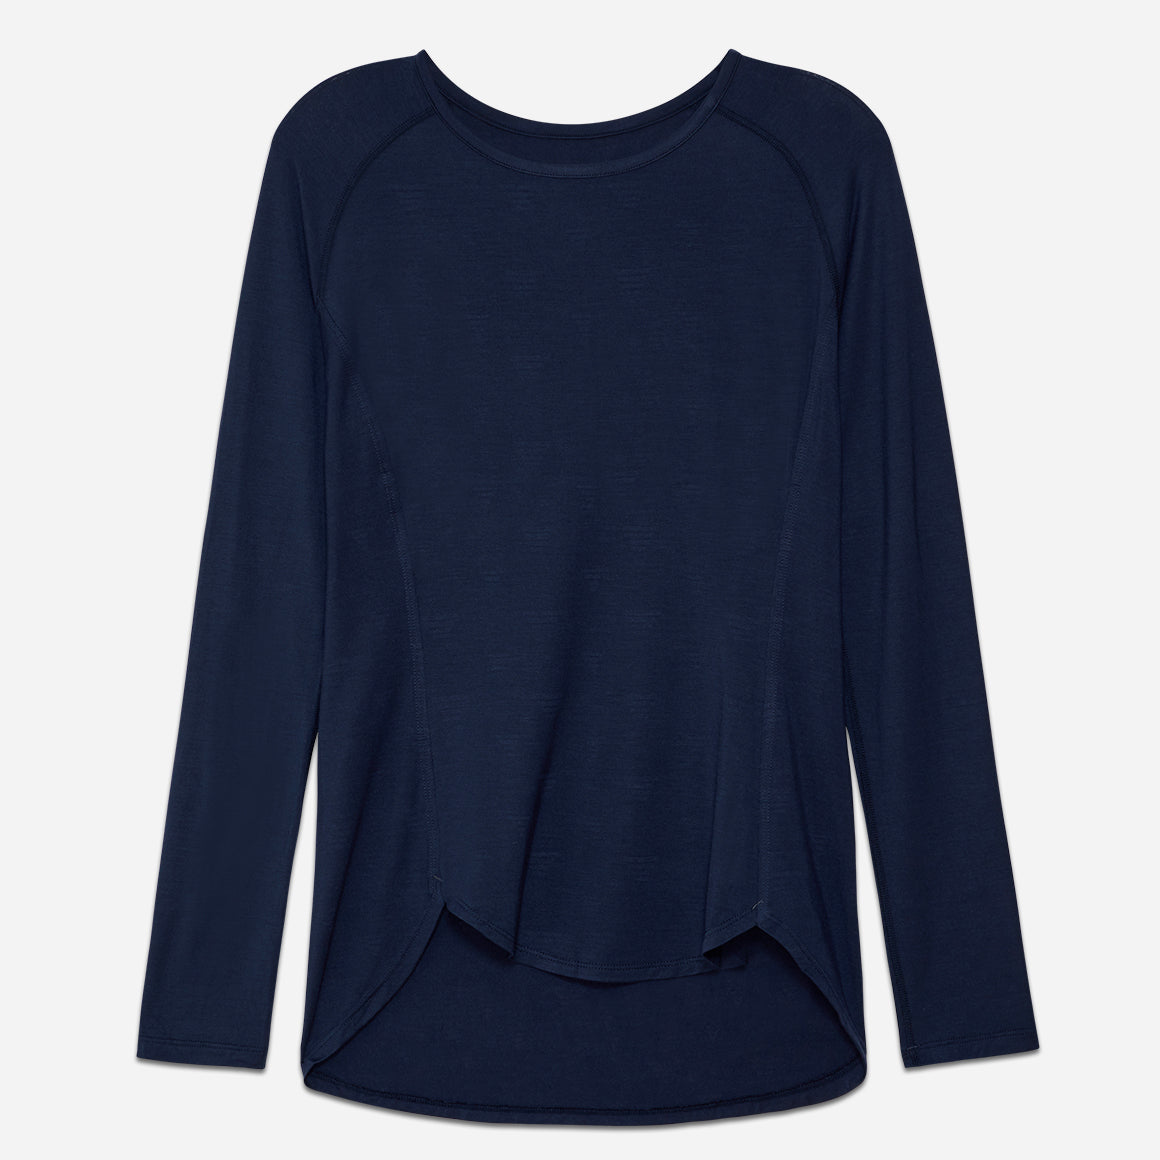 Dagsmejan’s Balance Sleep Long Sleeve Top in dark blue on a  grey background with a crew neckline and rounded hem.